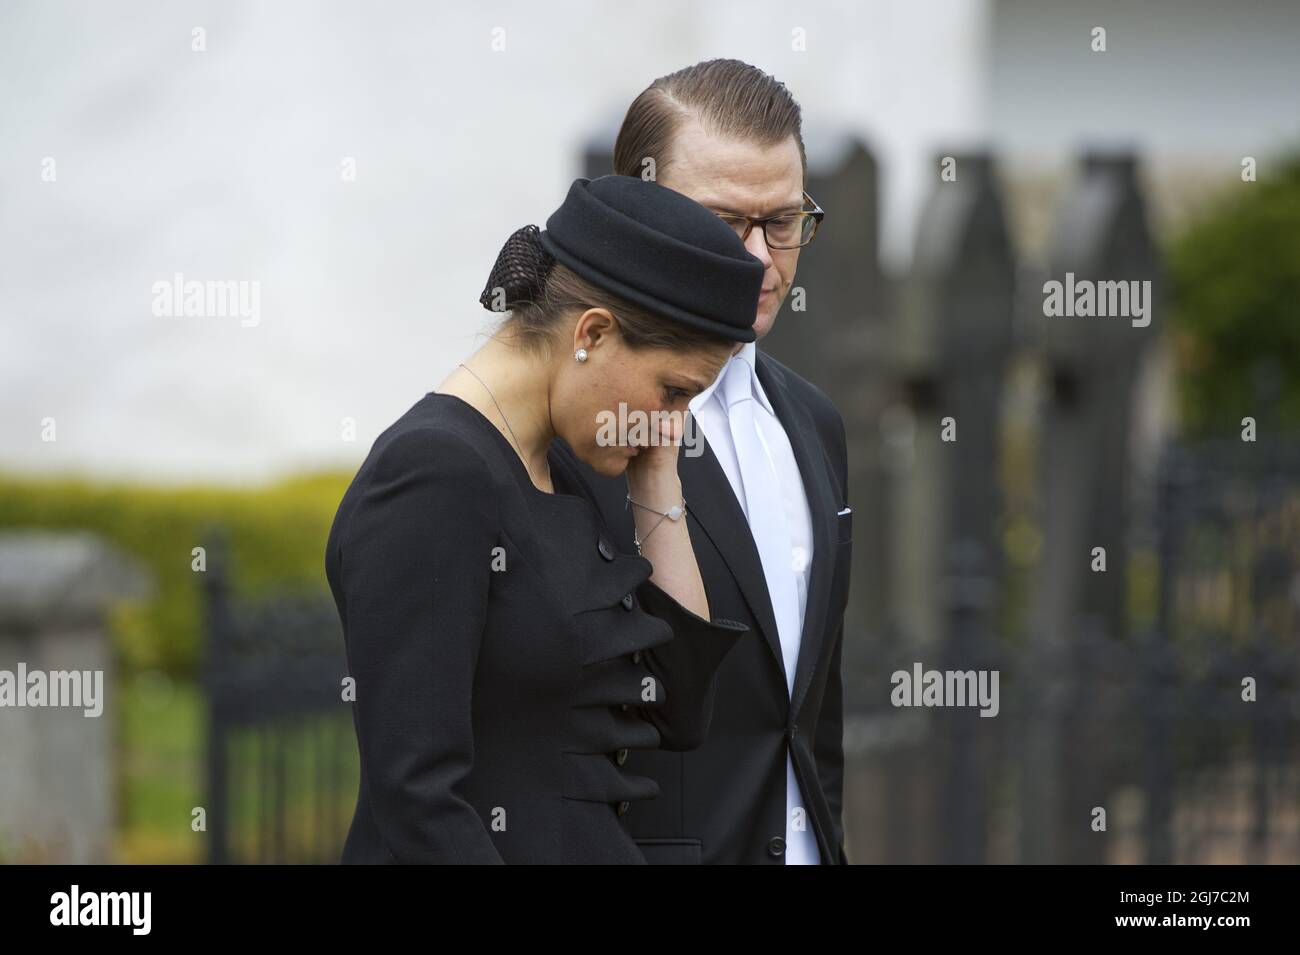 BASTAD 2012-05-14 Crown Princess Victoria and Prince Daniel of Sweden are seen during the funeral of Count Carl Johan Bernadotte in the Maria Church in Bastad, Sweden, May 14, 2012. Foto: Suvad Mrkonjic / XP / SCANPIX / kod 7116 ** OUT SWEDEN OUT T ** Stock Photo